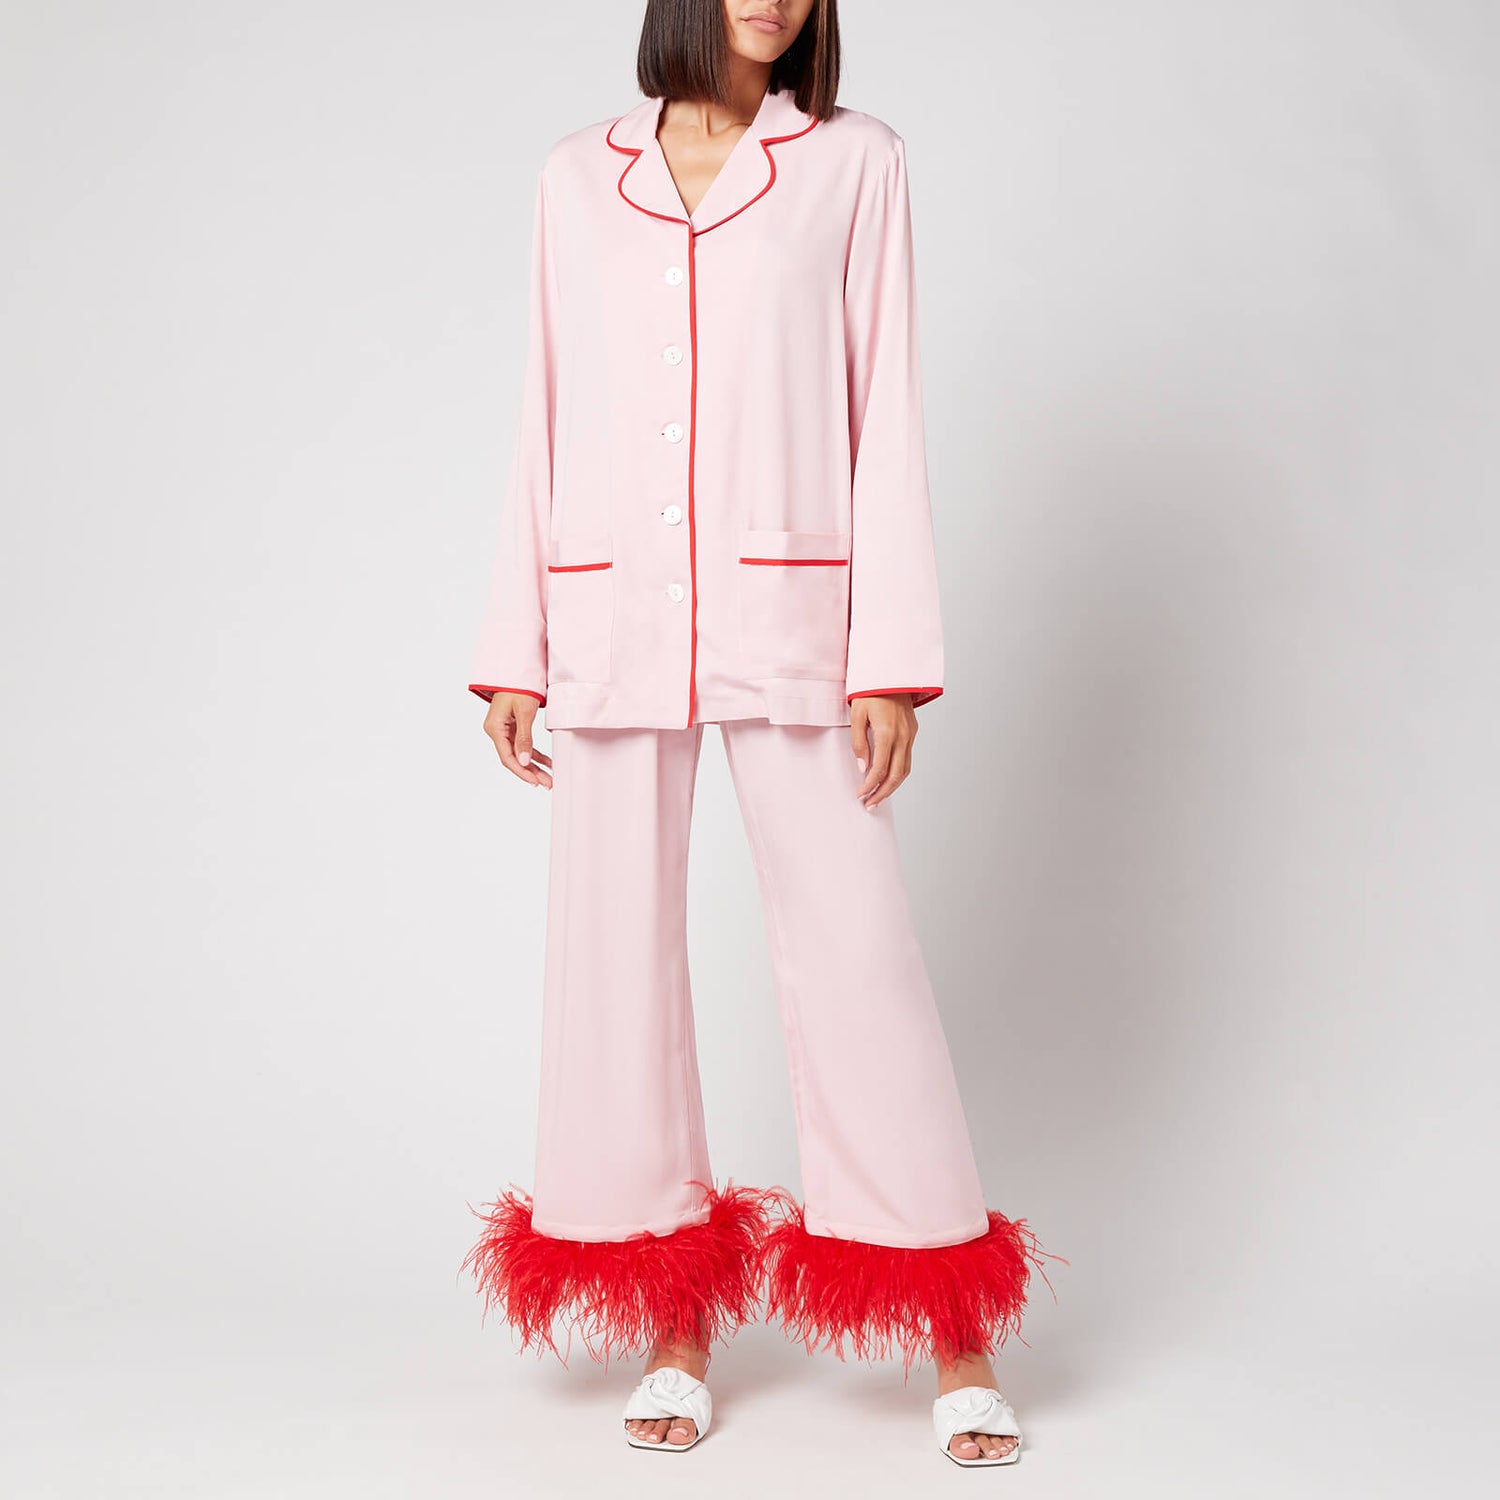 Sleeper Women's Party Pyjama Set With Feathers - Pink